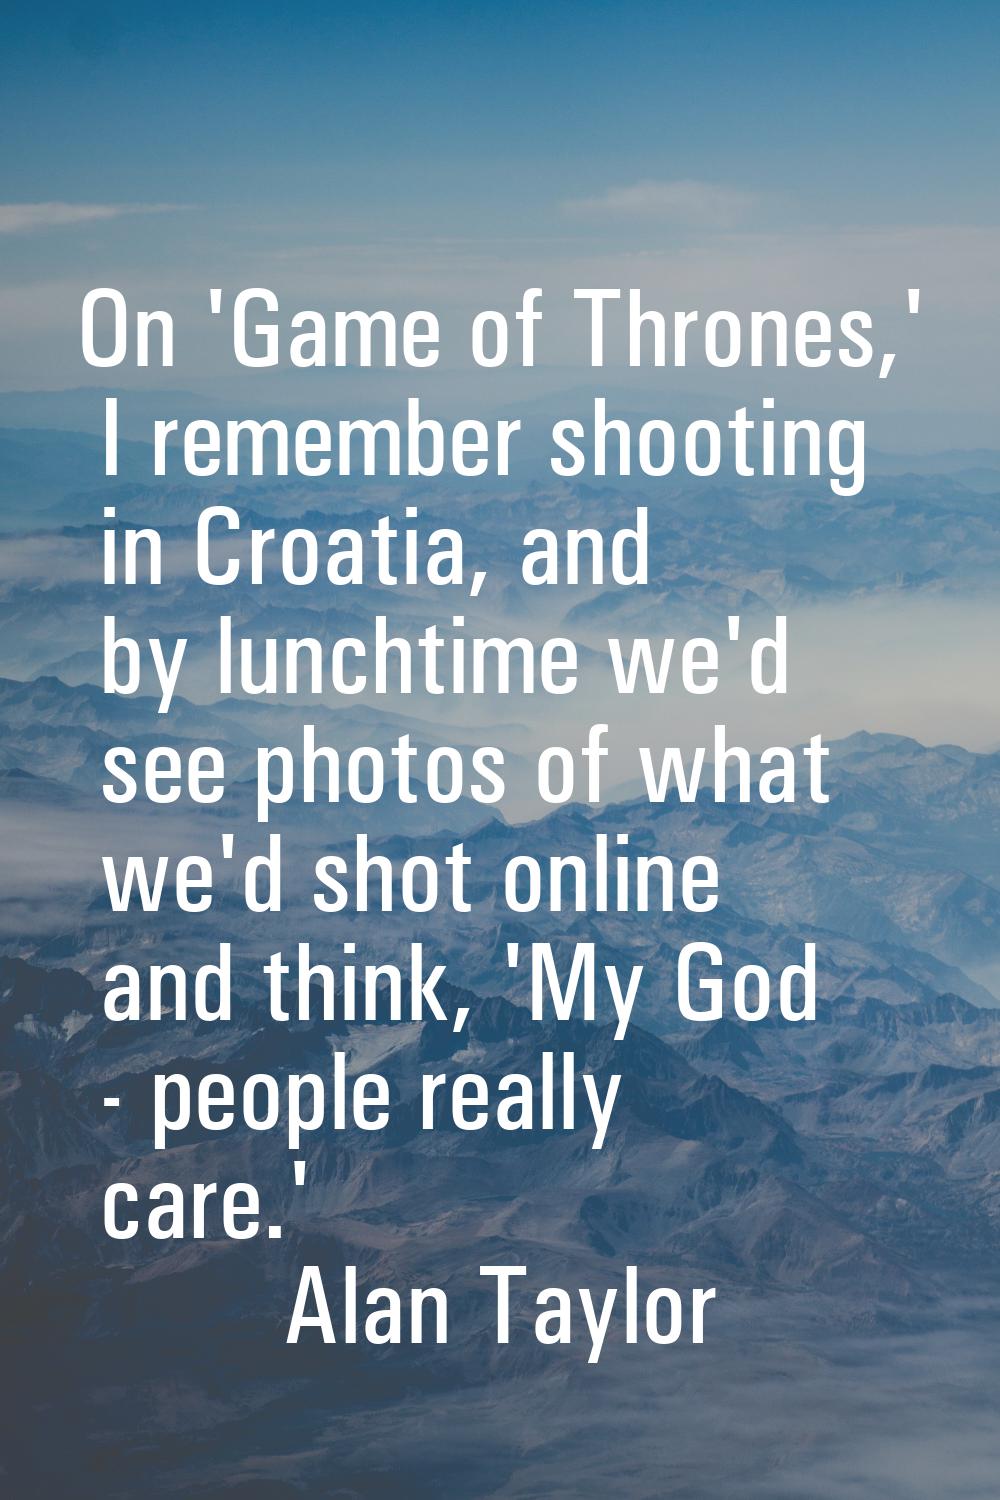 On 'Game of Thrones,' I remember shooting in Croatia, and by lunchtime we'd see photos of what we'd